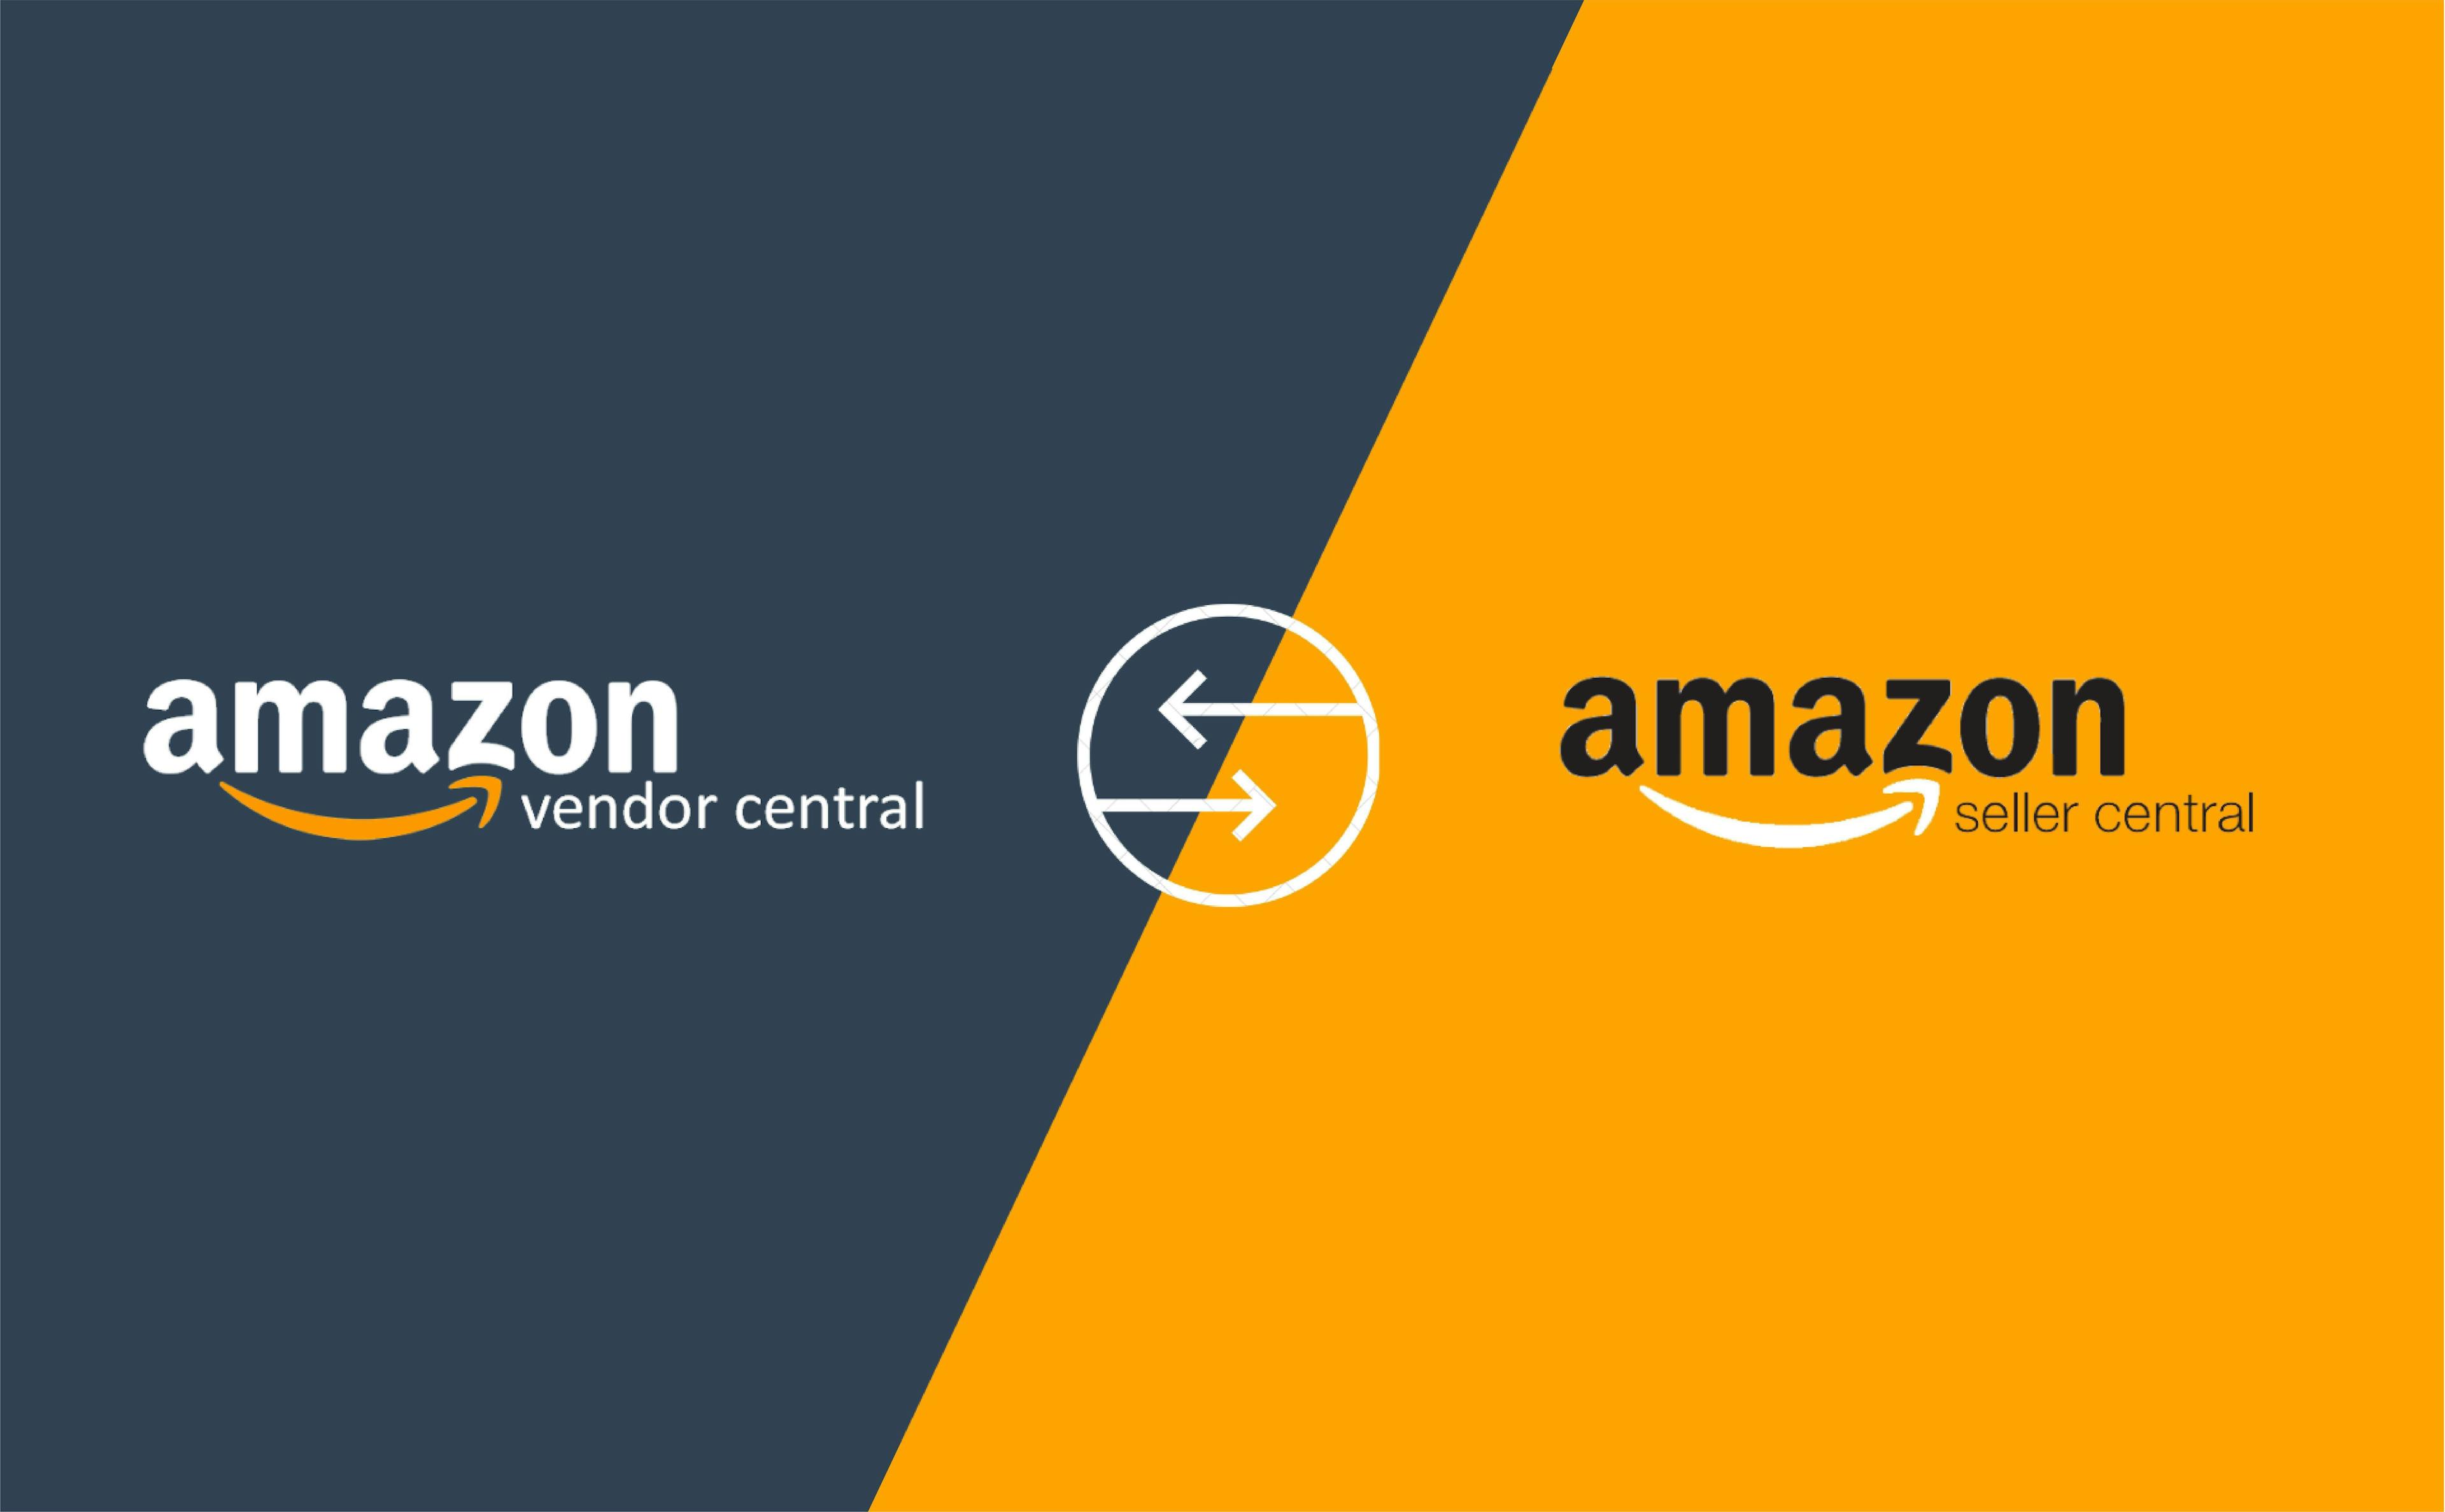 How to Make a Smooth Transition from Amazon Vendor Central to Seller Central